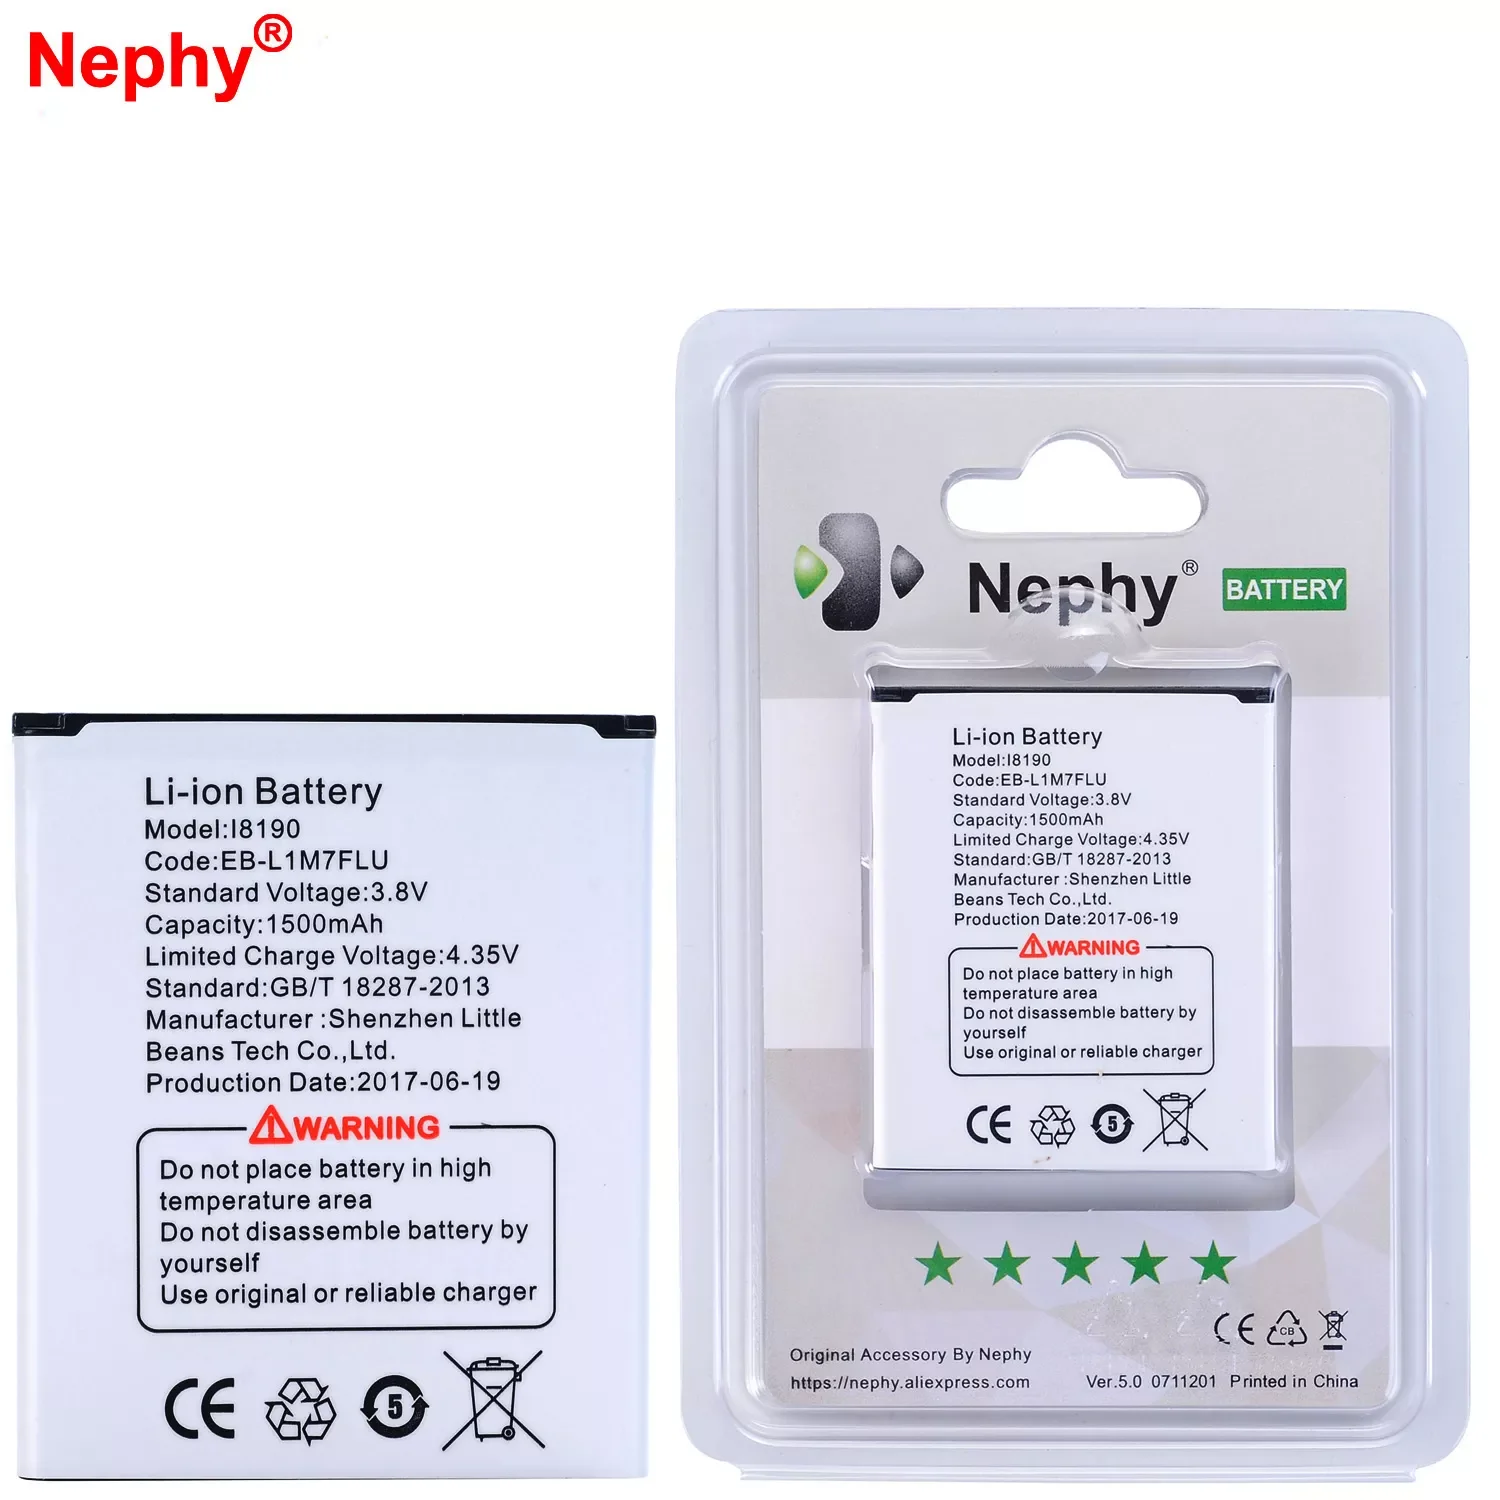 

2023New 2019 Nephy Original Battery For Samsung Galaxy S3 Mini i8190 i8190N Ace 2 I8160 Trend I699 S Duos S7562 S7568 GT-S7562 1